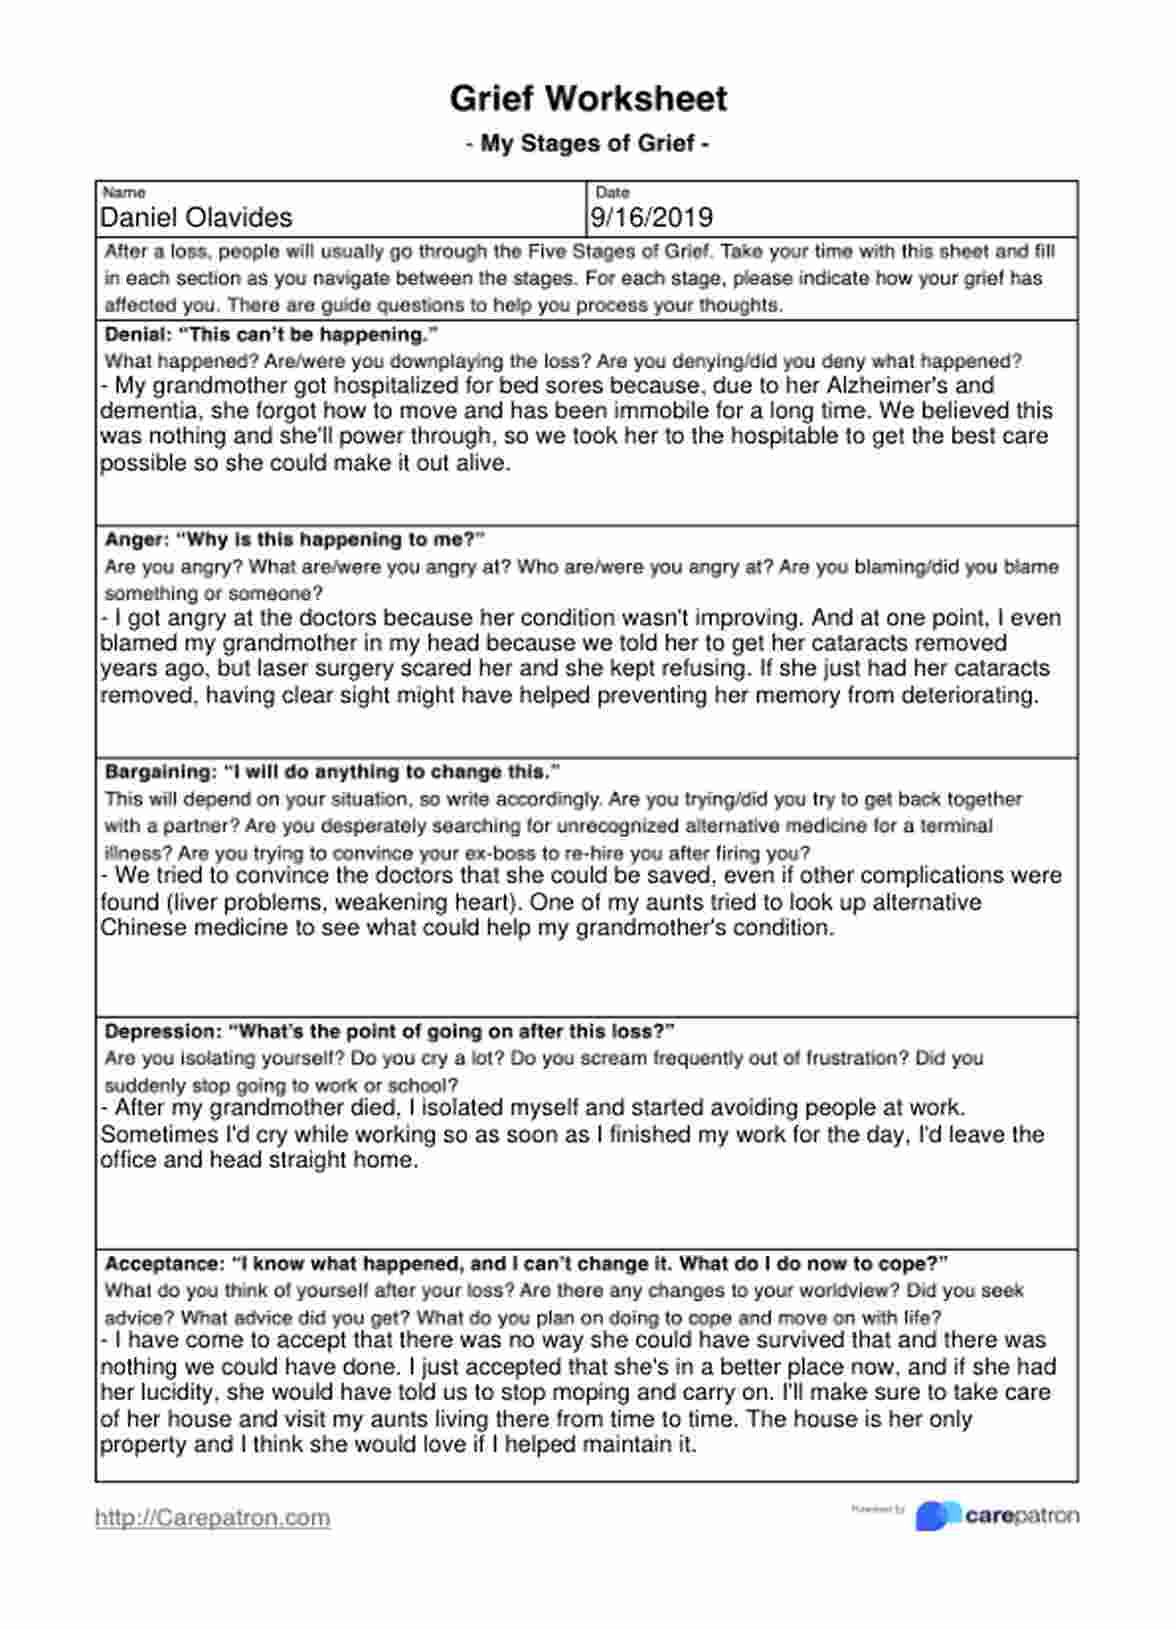 Grief Worksheets PDF Example